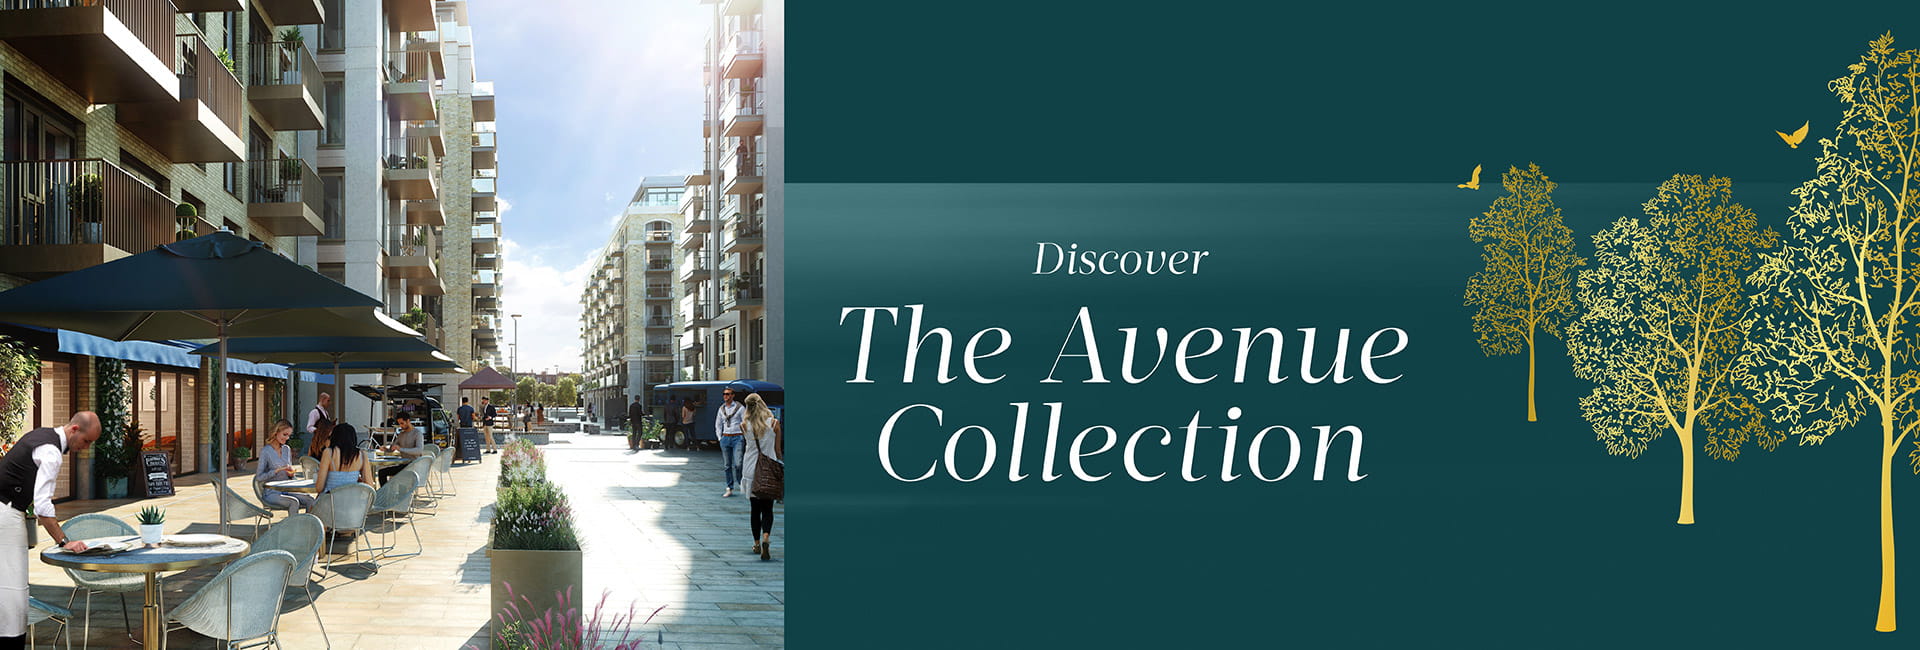 Fulham Reach - The Avenue Collection